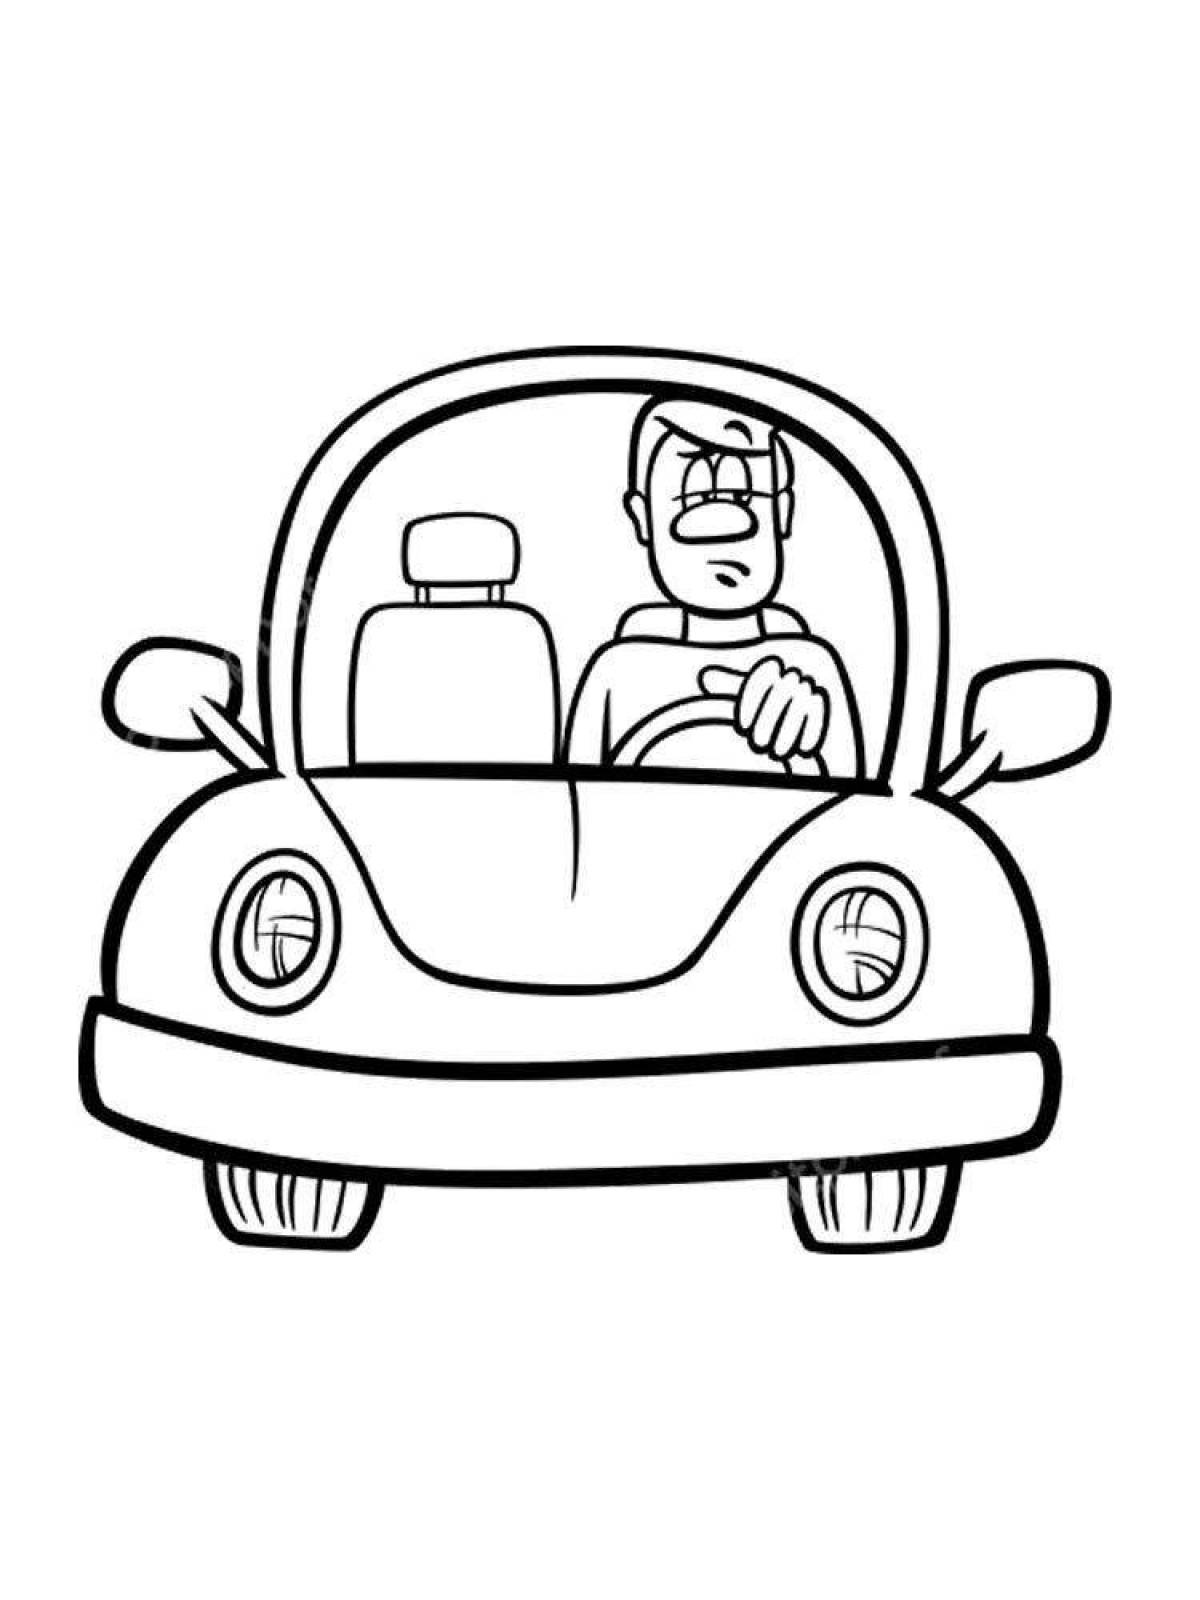 Coloring page joyful driver for kids